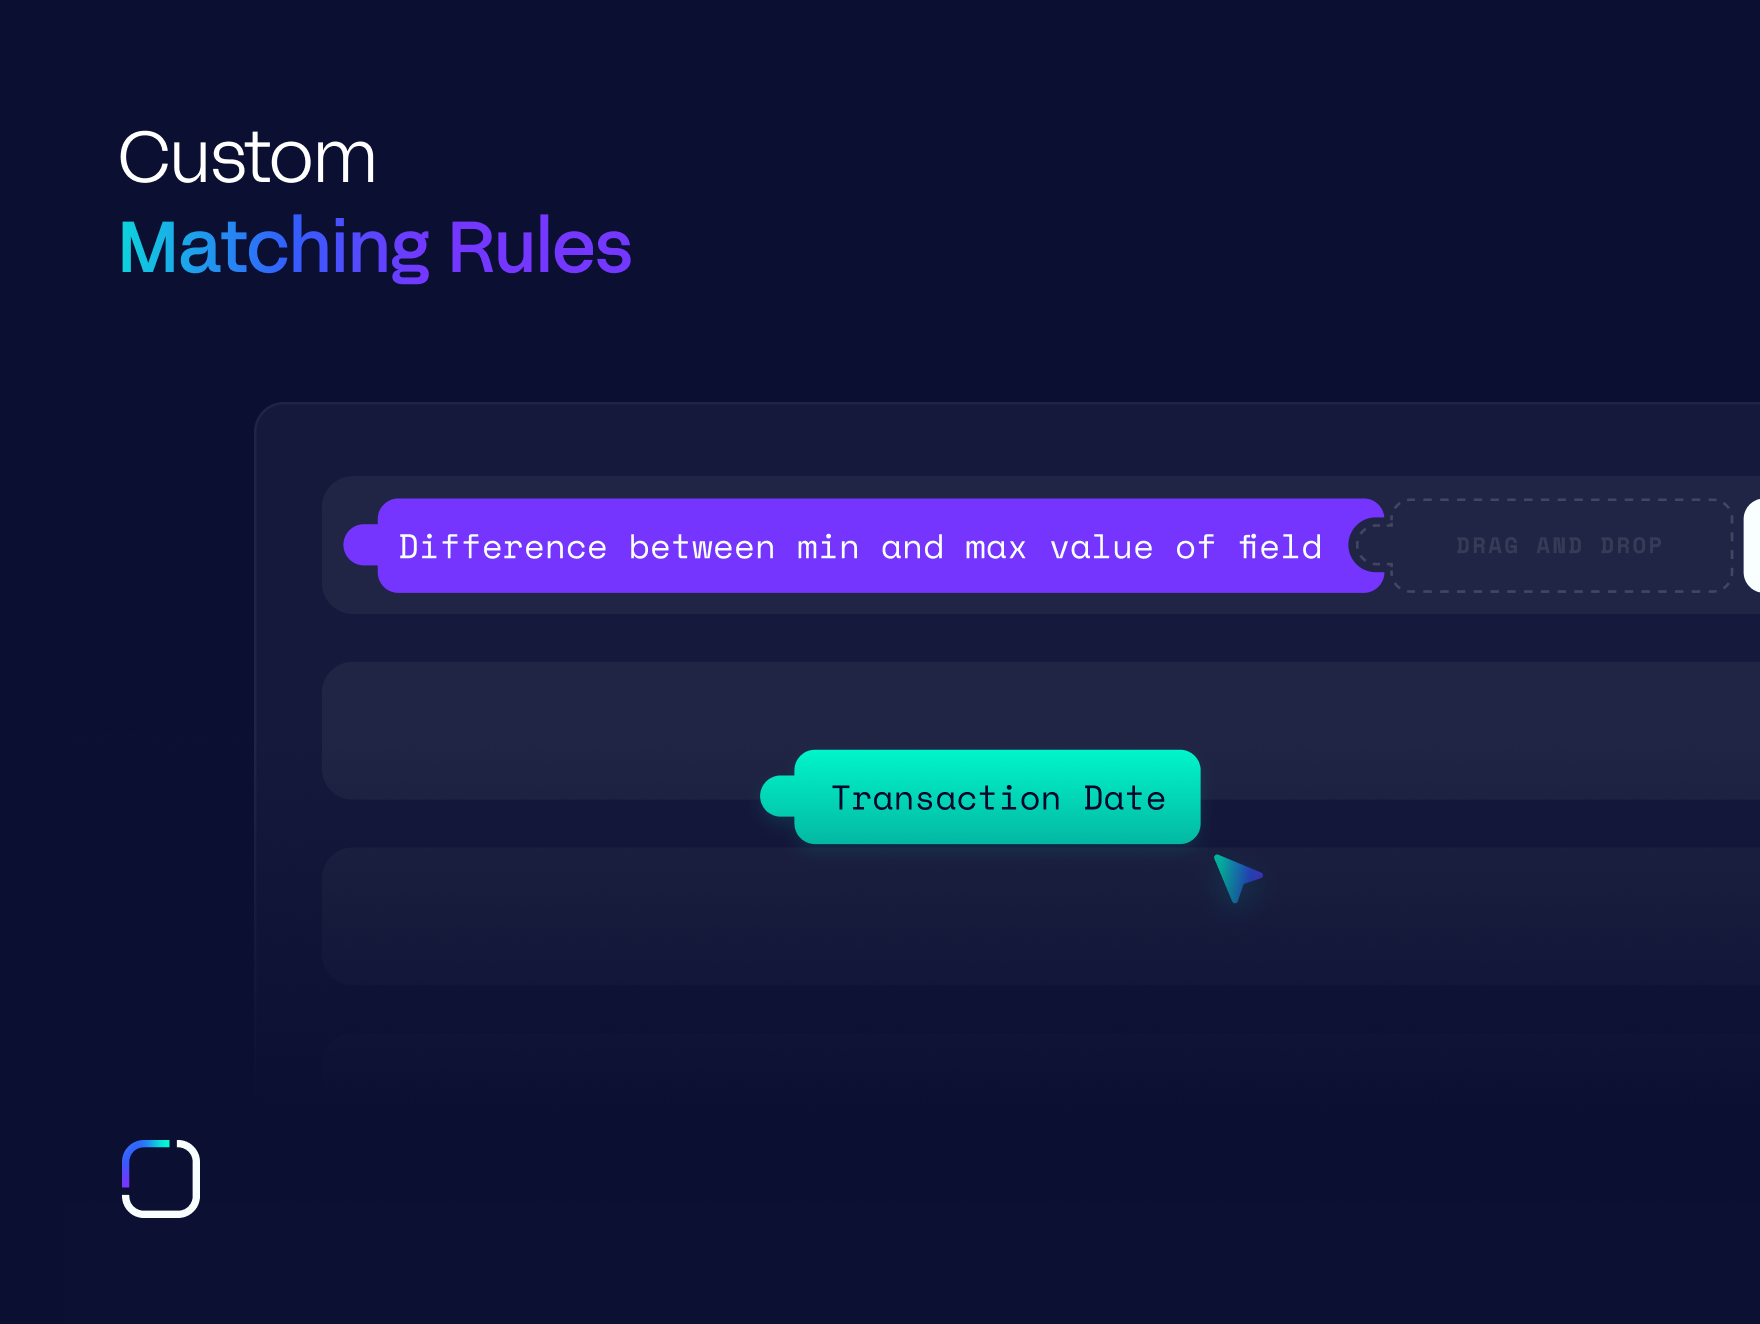 Besides the pre-configured industry-specific matching rules, you can create your own according to your needs. With our drag-and-drop system you build the rules independently.